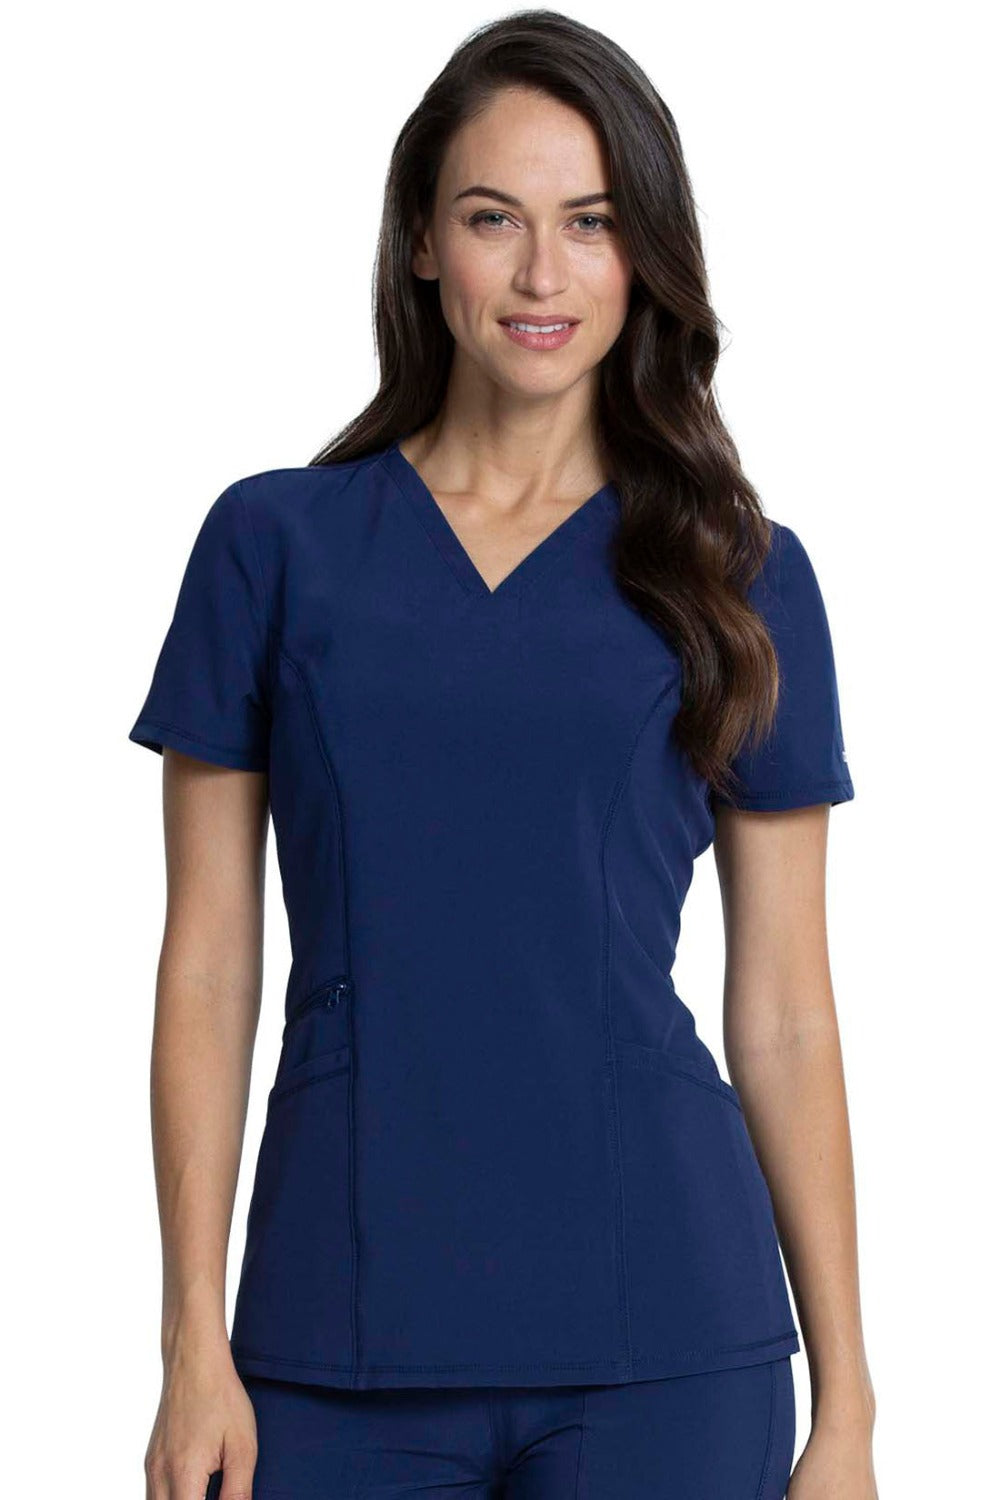 Cherokee Allura V-Neck Scrub Top in Navy at Parker's Clothing and Shoes.